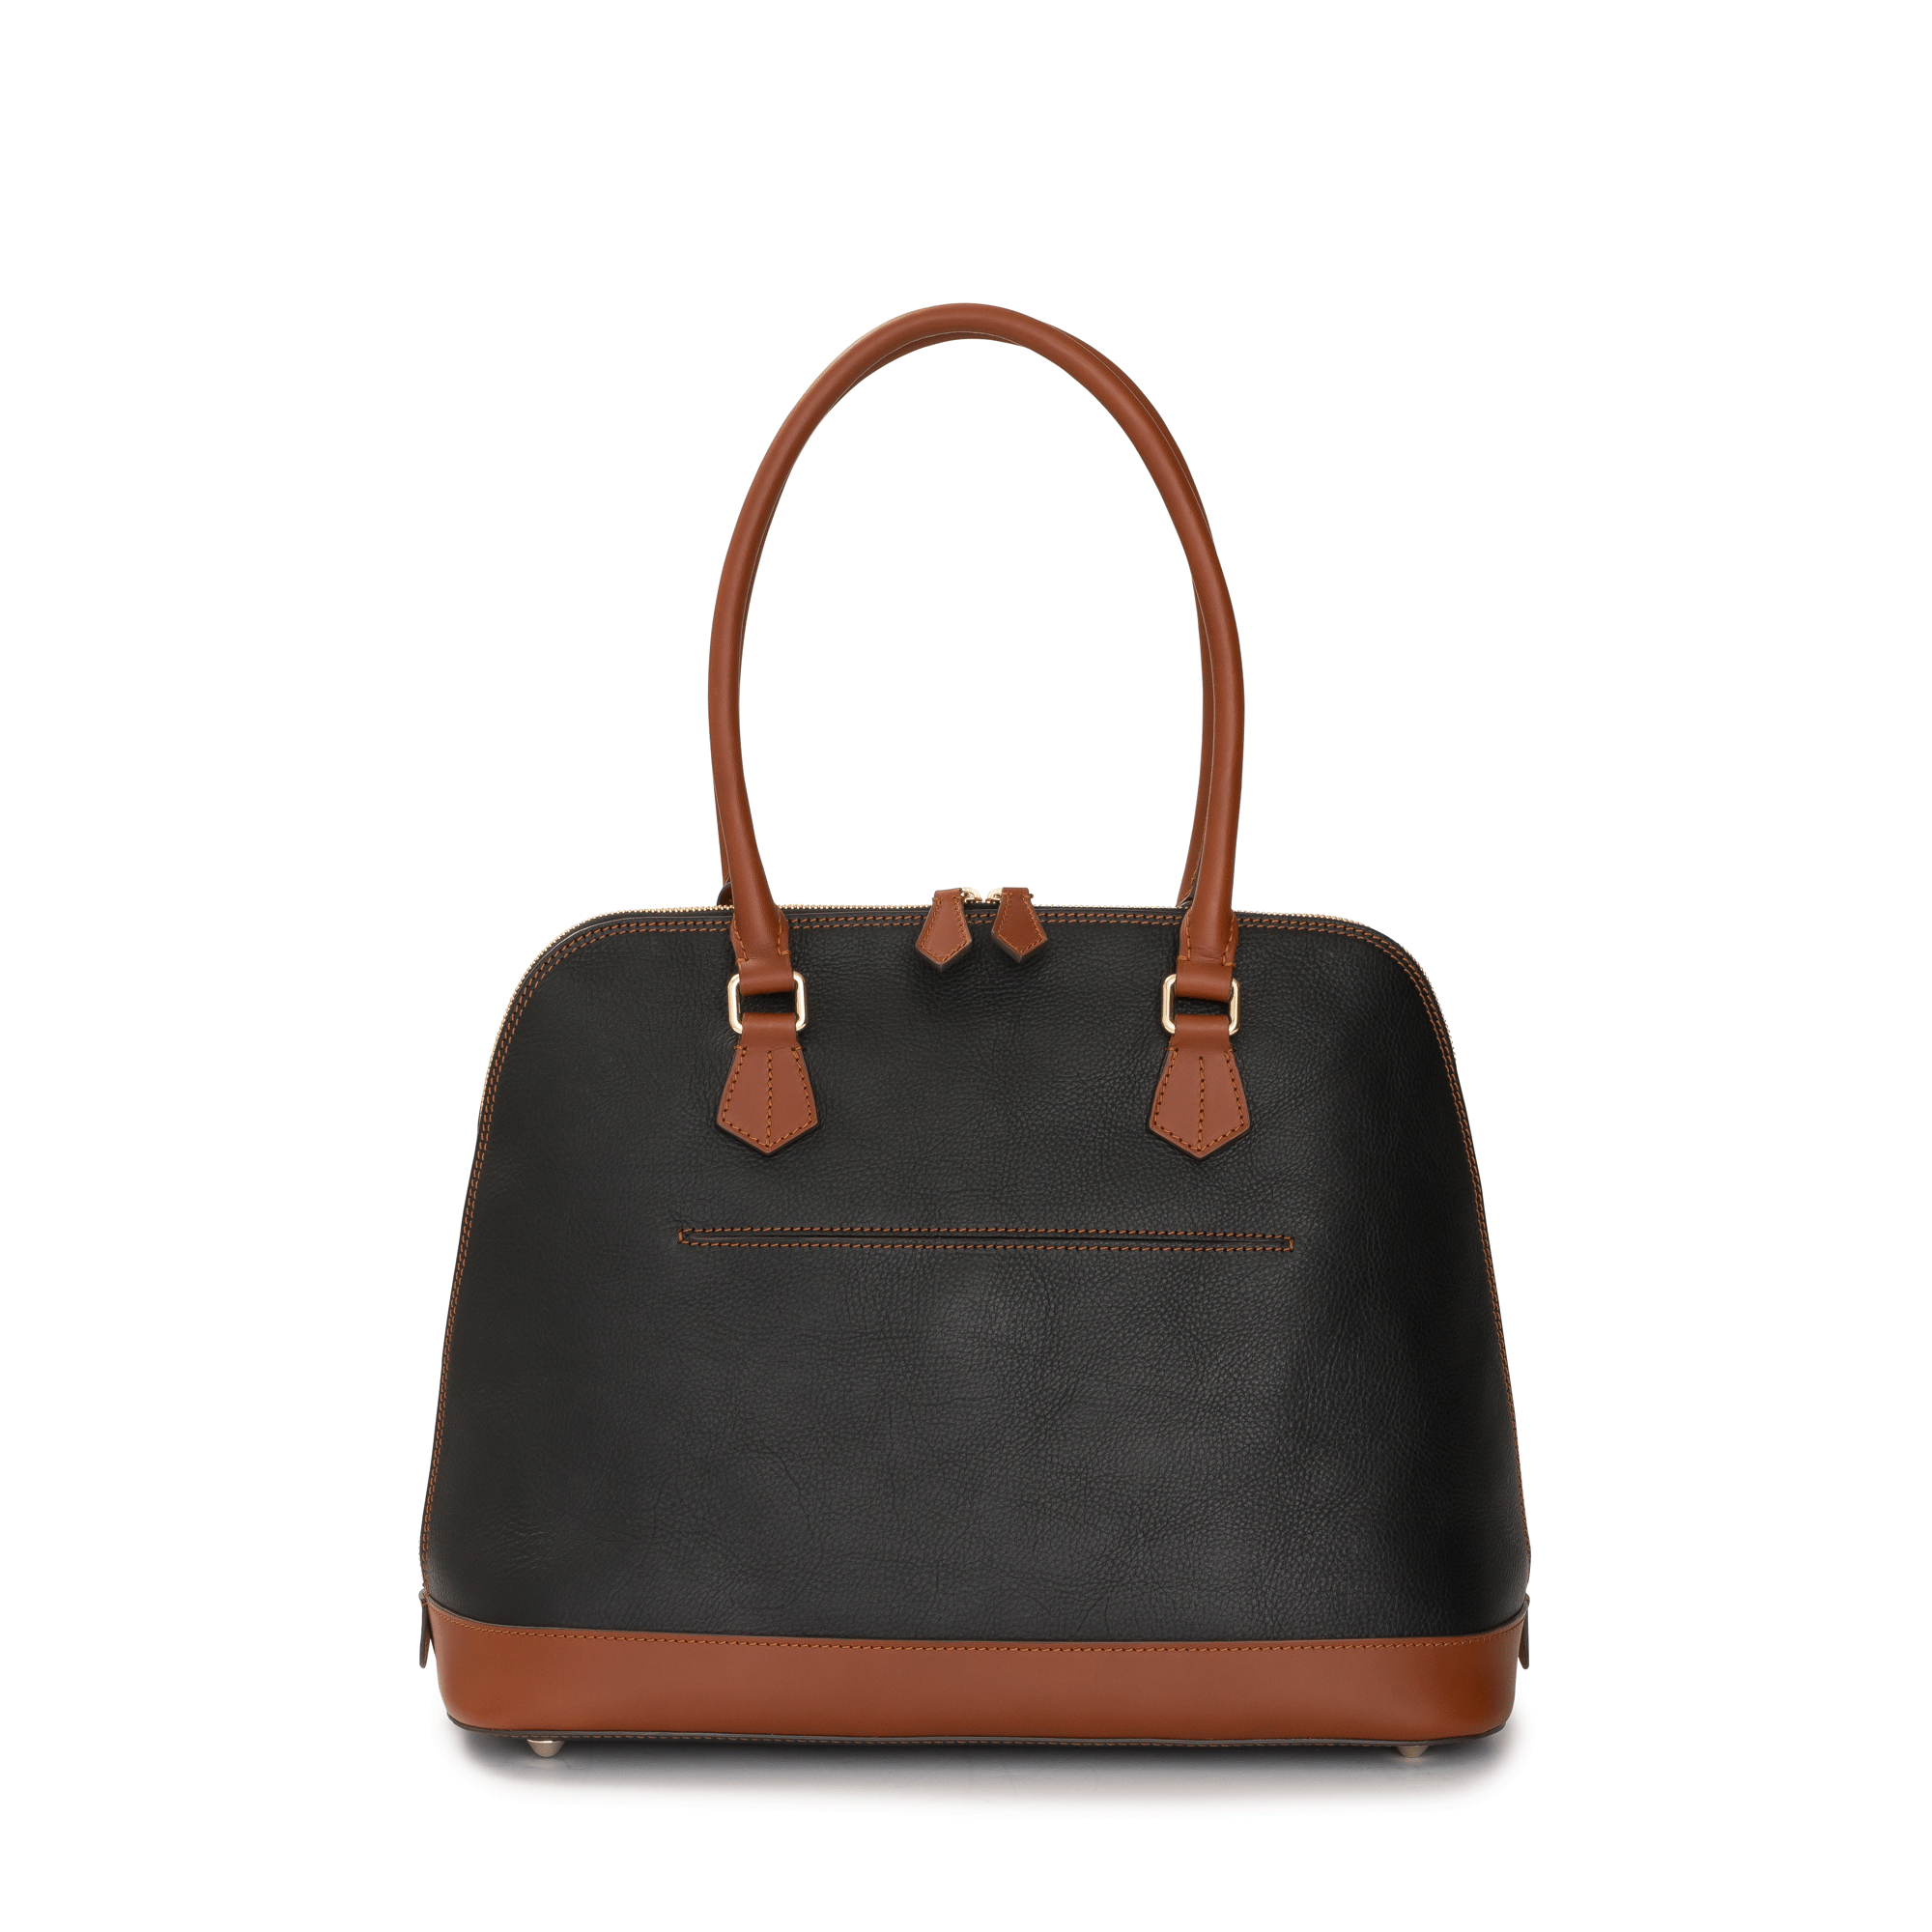 Amelie Leather Diaper Bag in Black and Gold